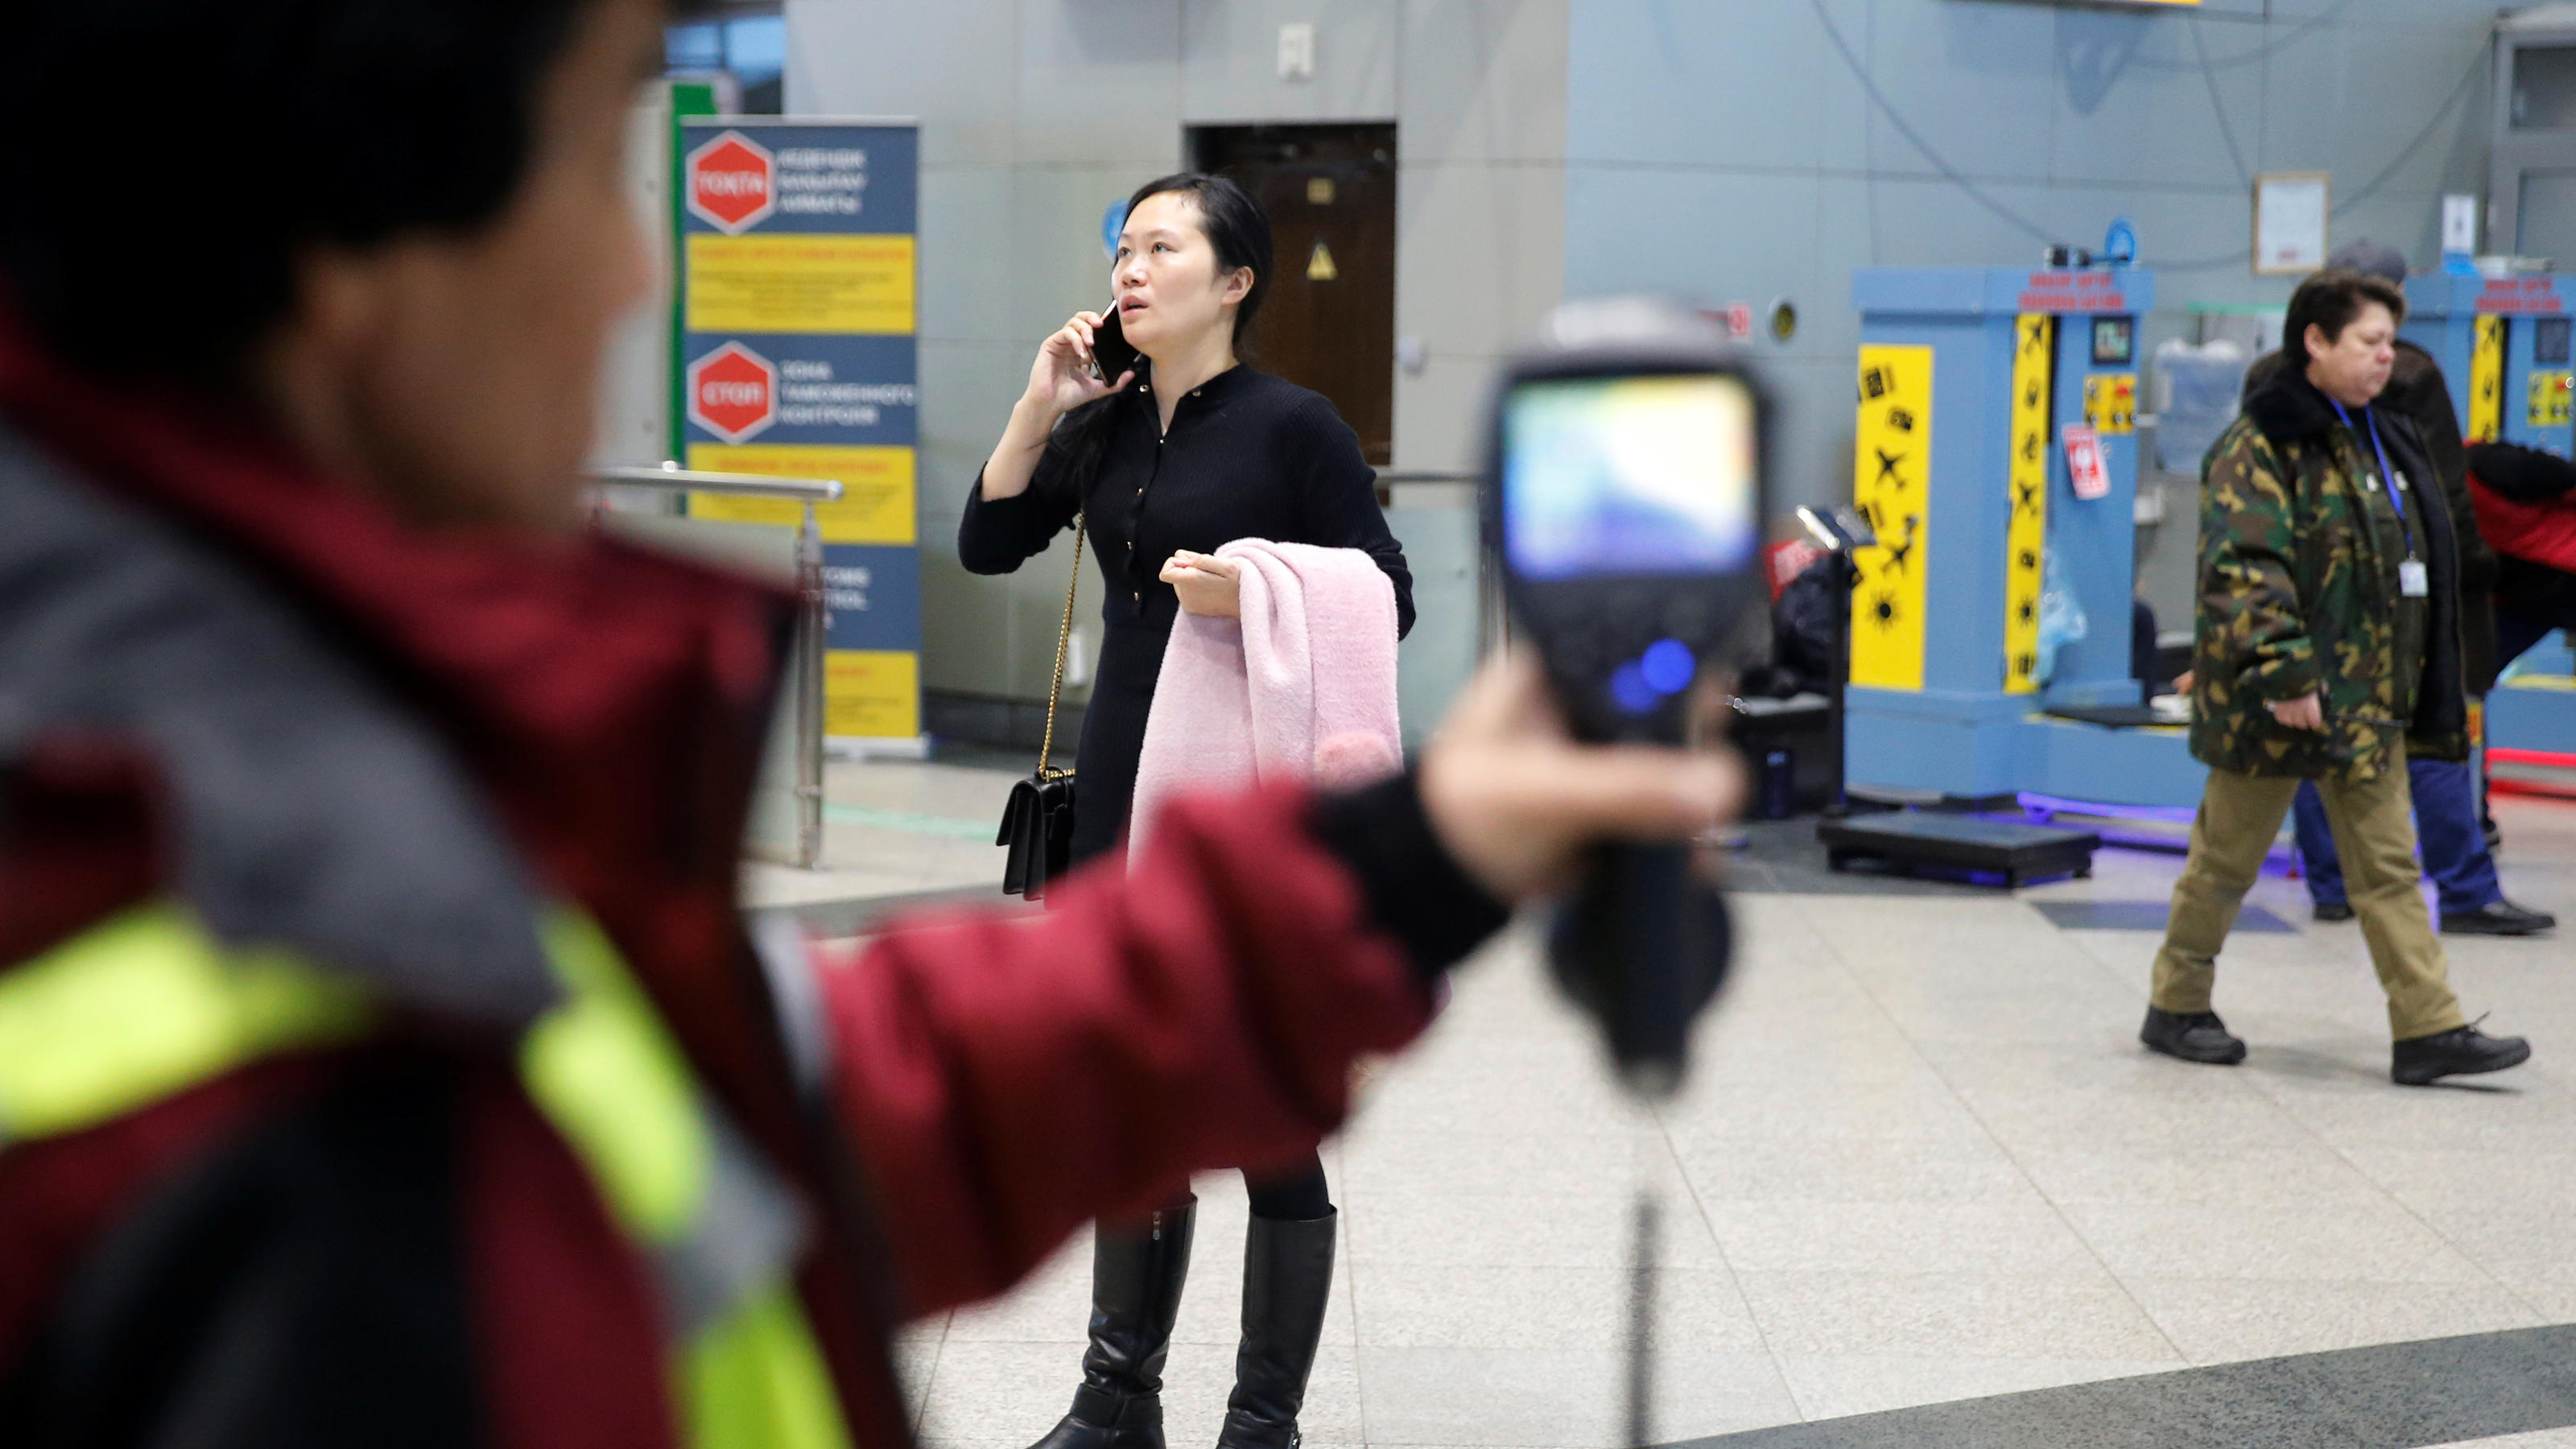 Kazakh sanitary-epidemiological service worker uses a thermal scanner to detect travellers from China who may have symptoms possibly connected with the previously unknown coronavirus, at Almaty International Airport, Kazakhstan January 21, 2020. REUT